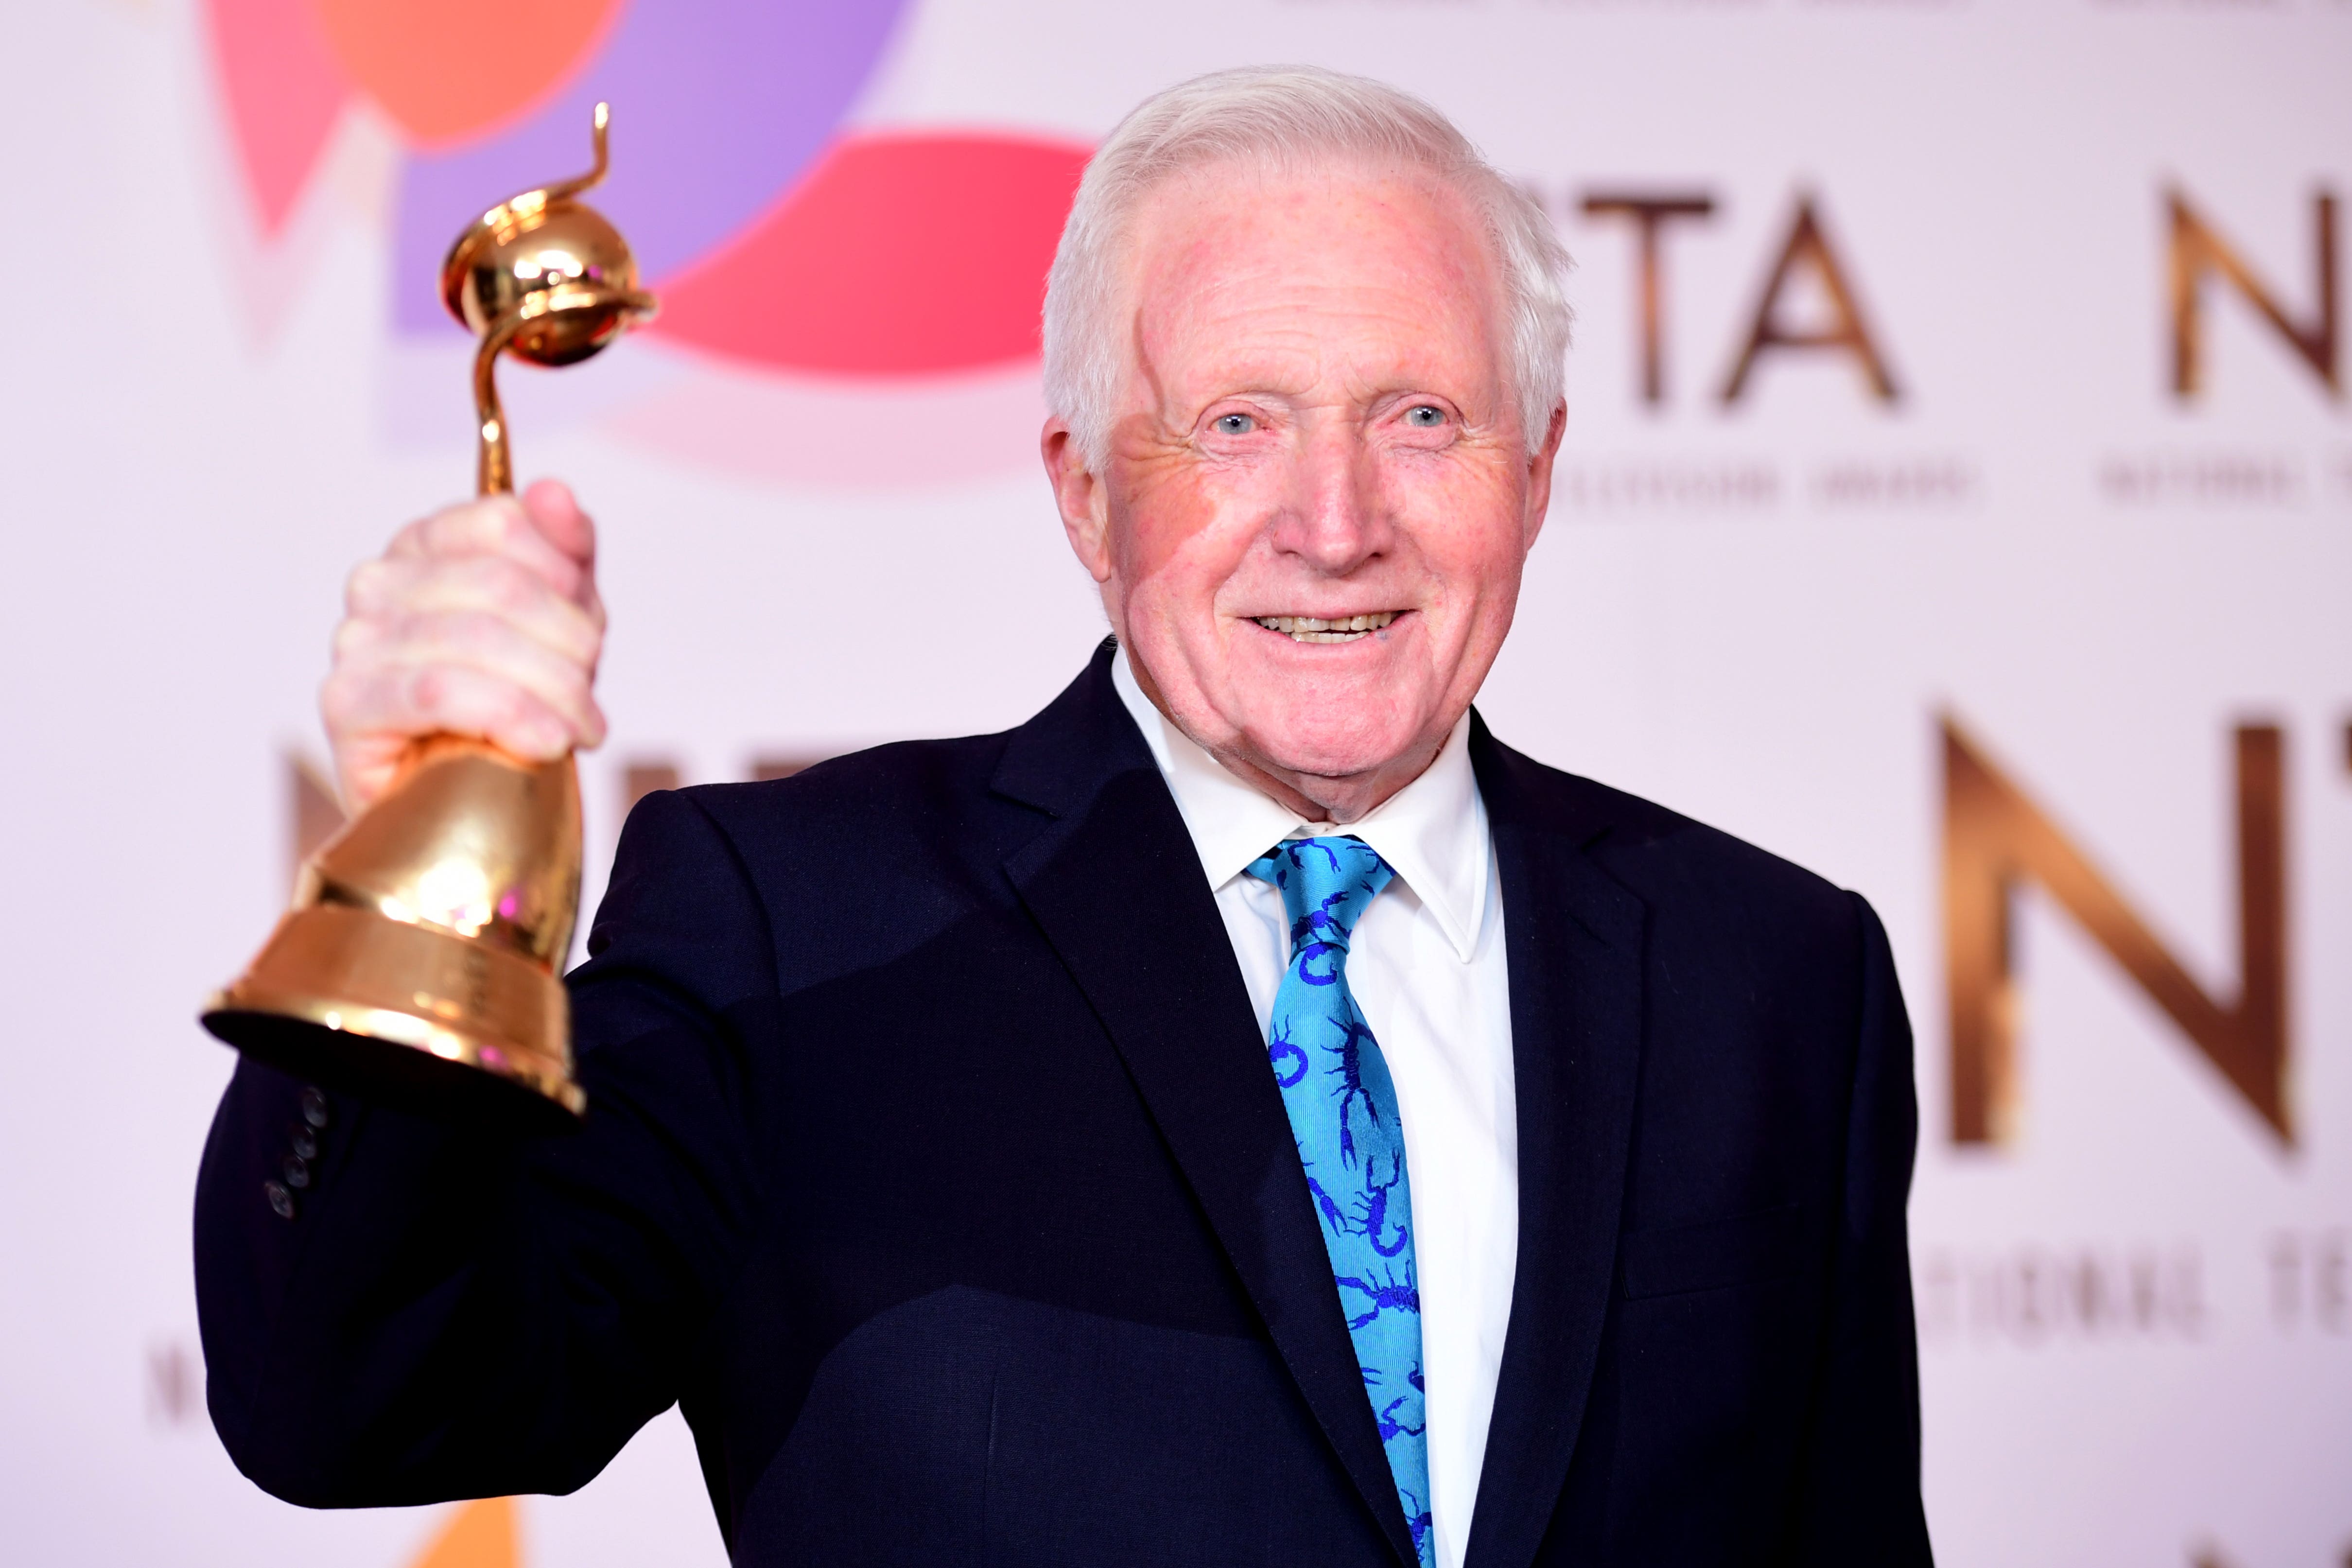 David Dimbleby with the Special Recognition award at the National Television Awards 2019